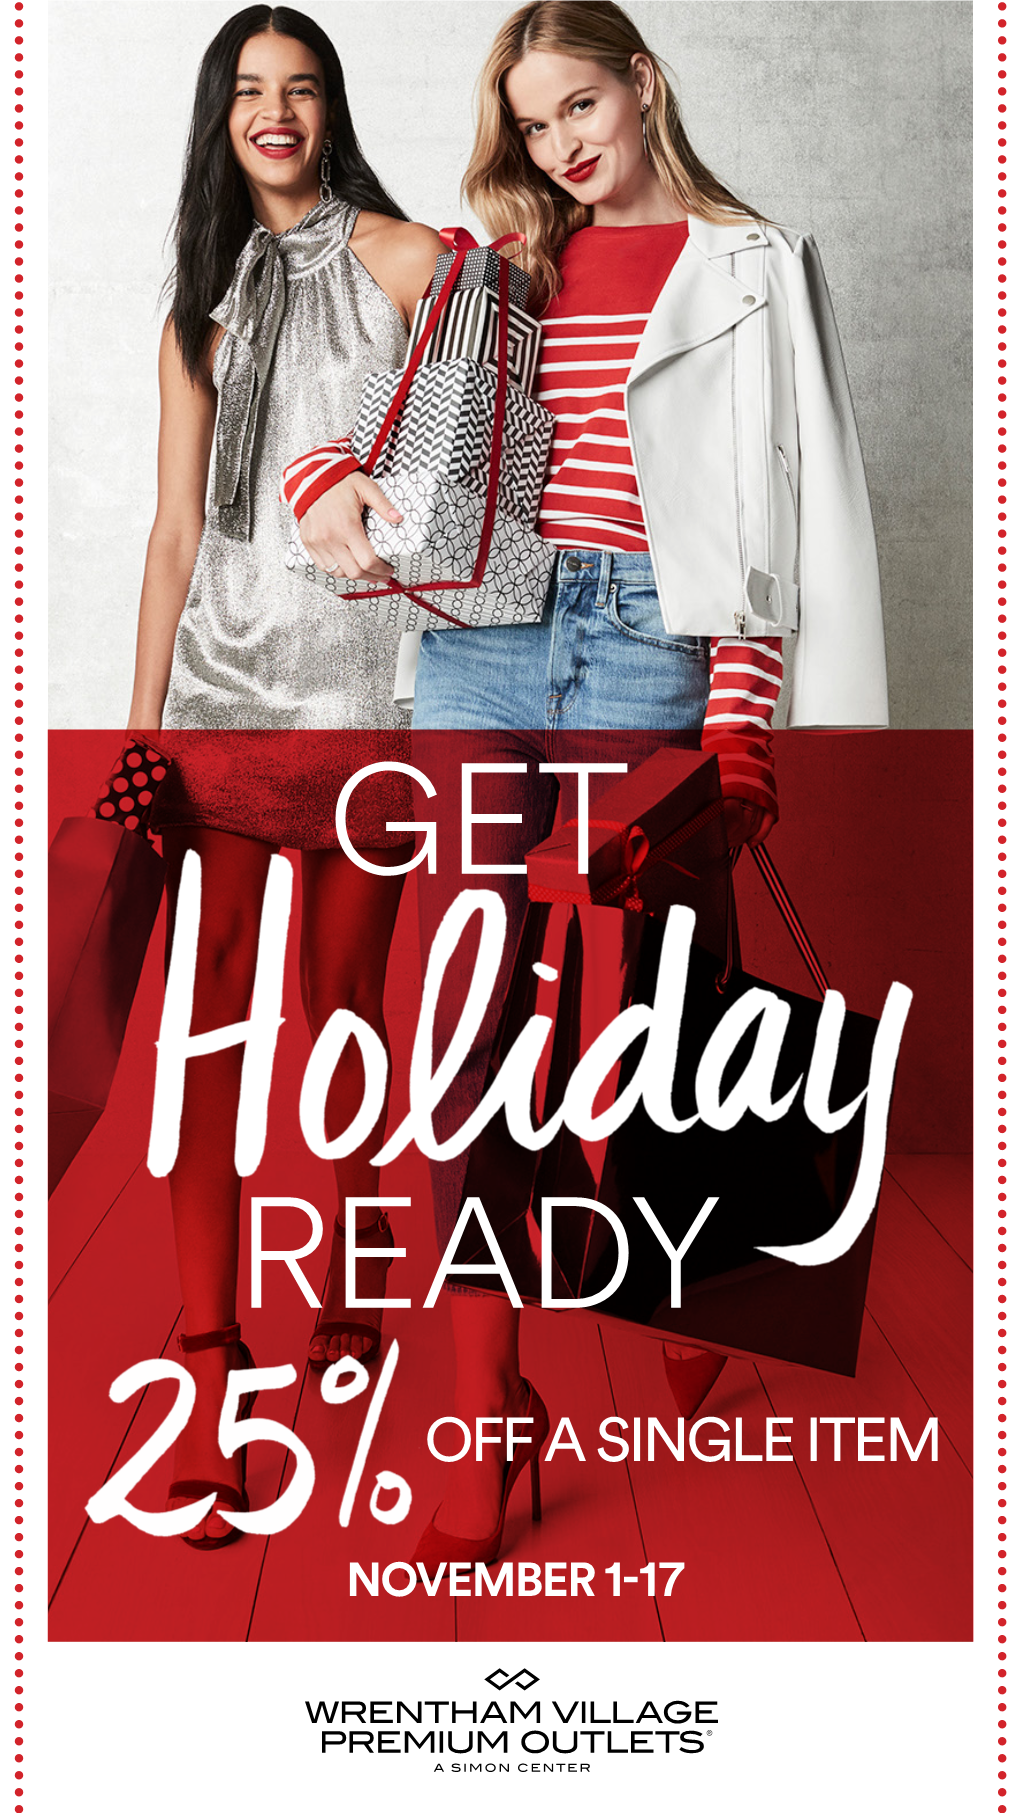 LANE BRYANT OUTLET Code: 00259712 25% OFF a SINGLE ITEM IN-STORE